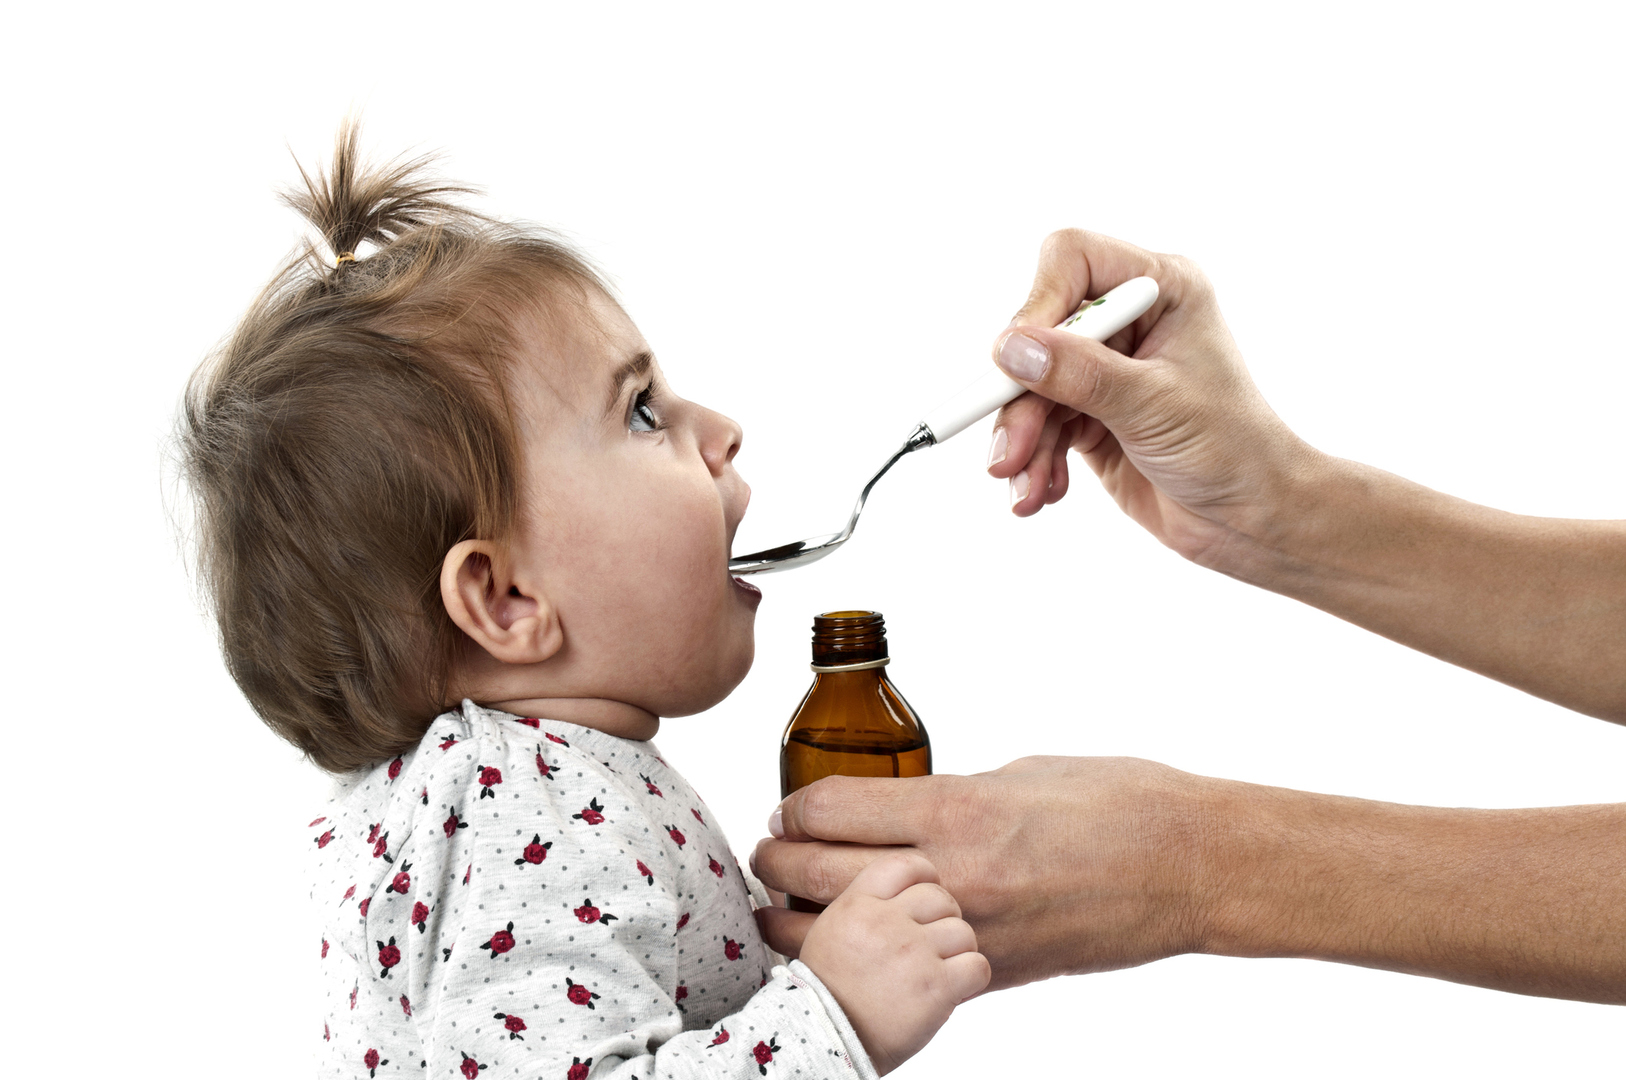 Do children really need cough and cold medicine when they have a cold?